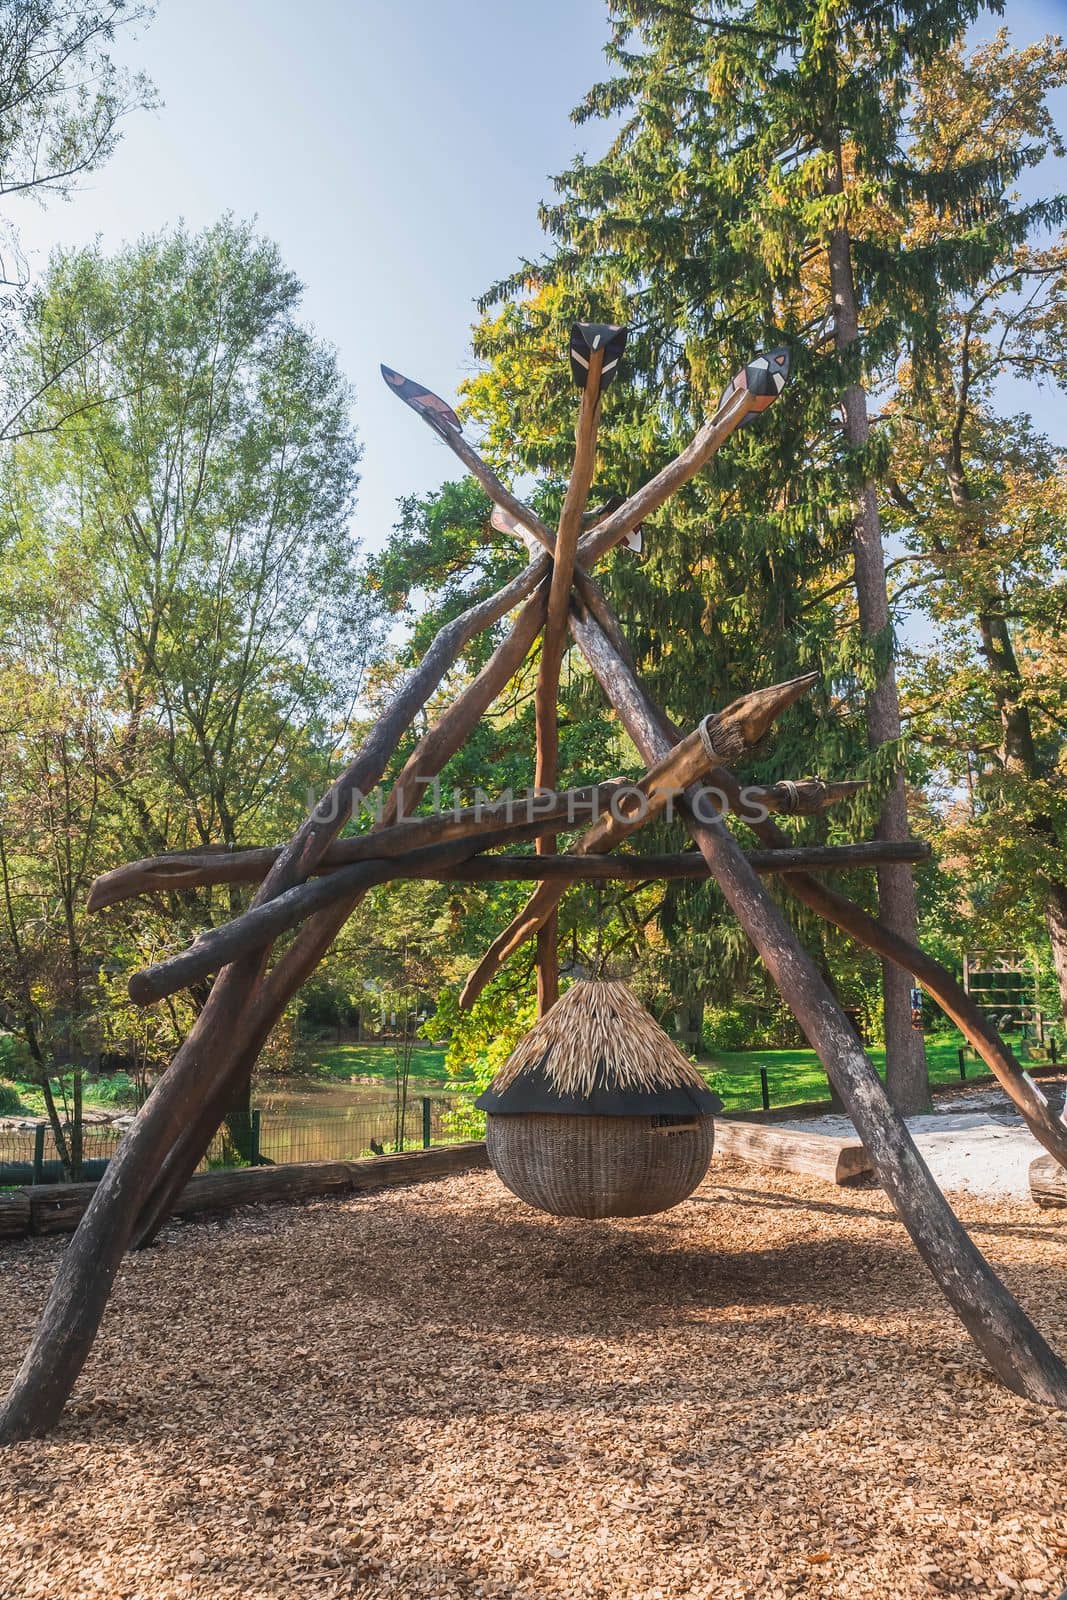 Round children's house suspended from huge Indian spears on the playground of the Ljubljana Zoo